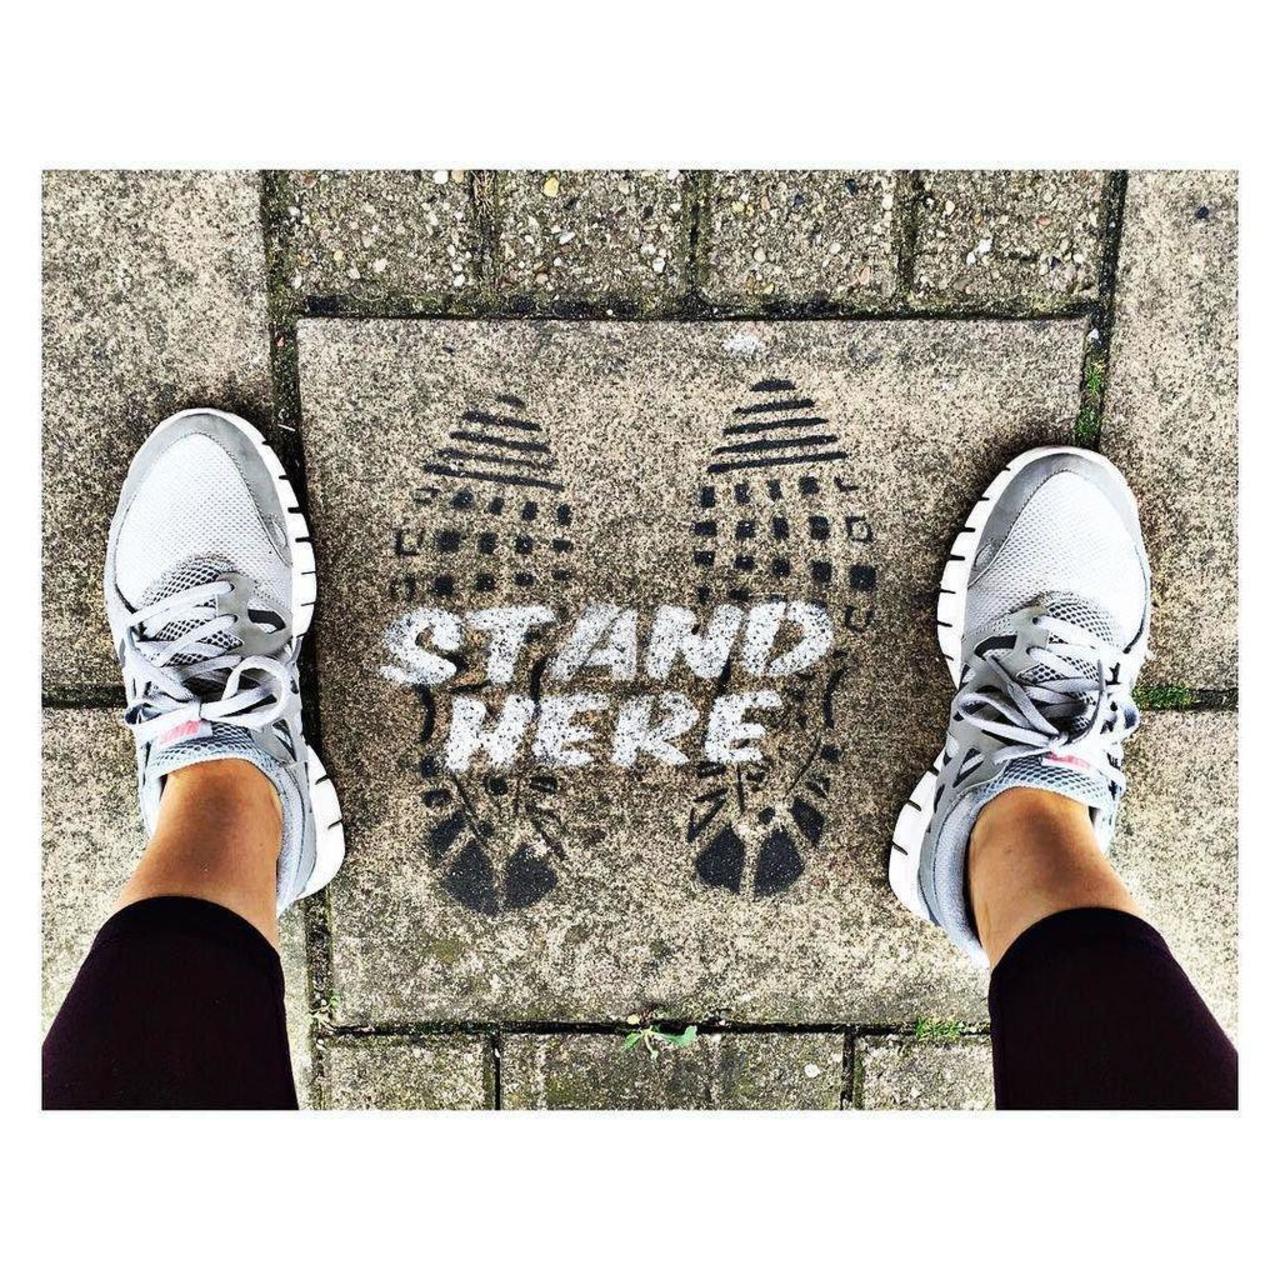 Stood on the side...what a rebel  @dotmasters #dotmasters #streetart #graffiti #paint #spraypaint #footstep #nike … http://t.co/QXwuaUQCQc